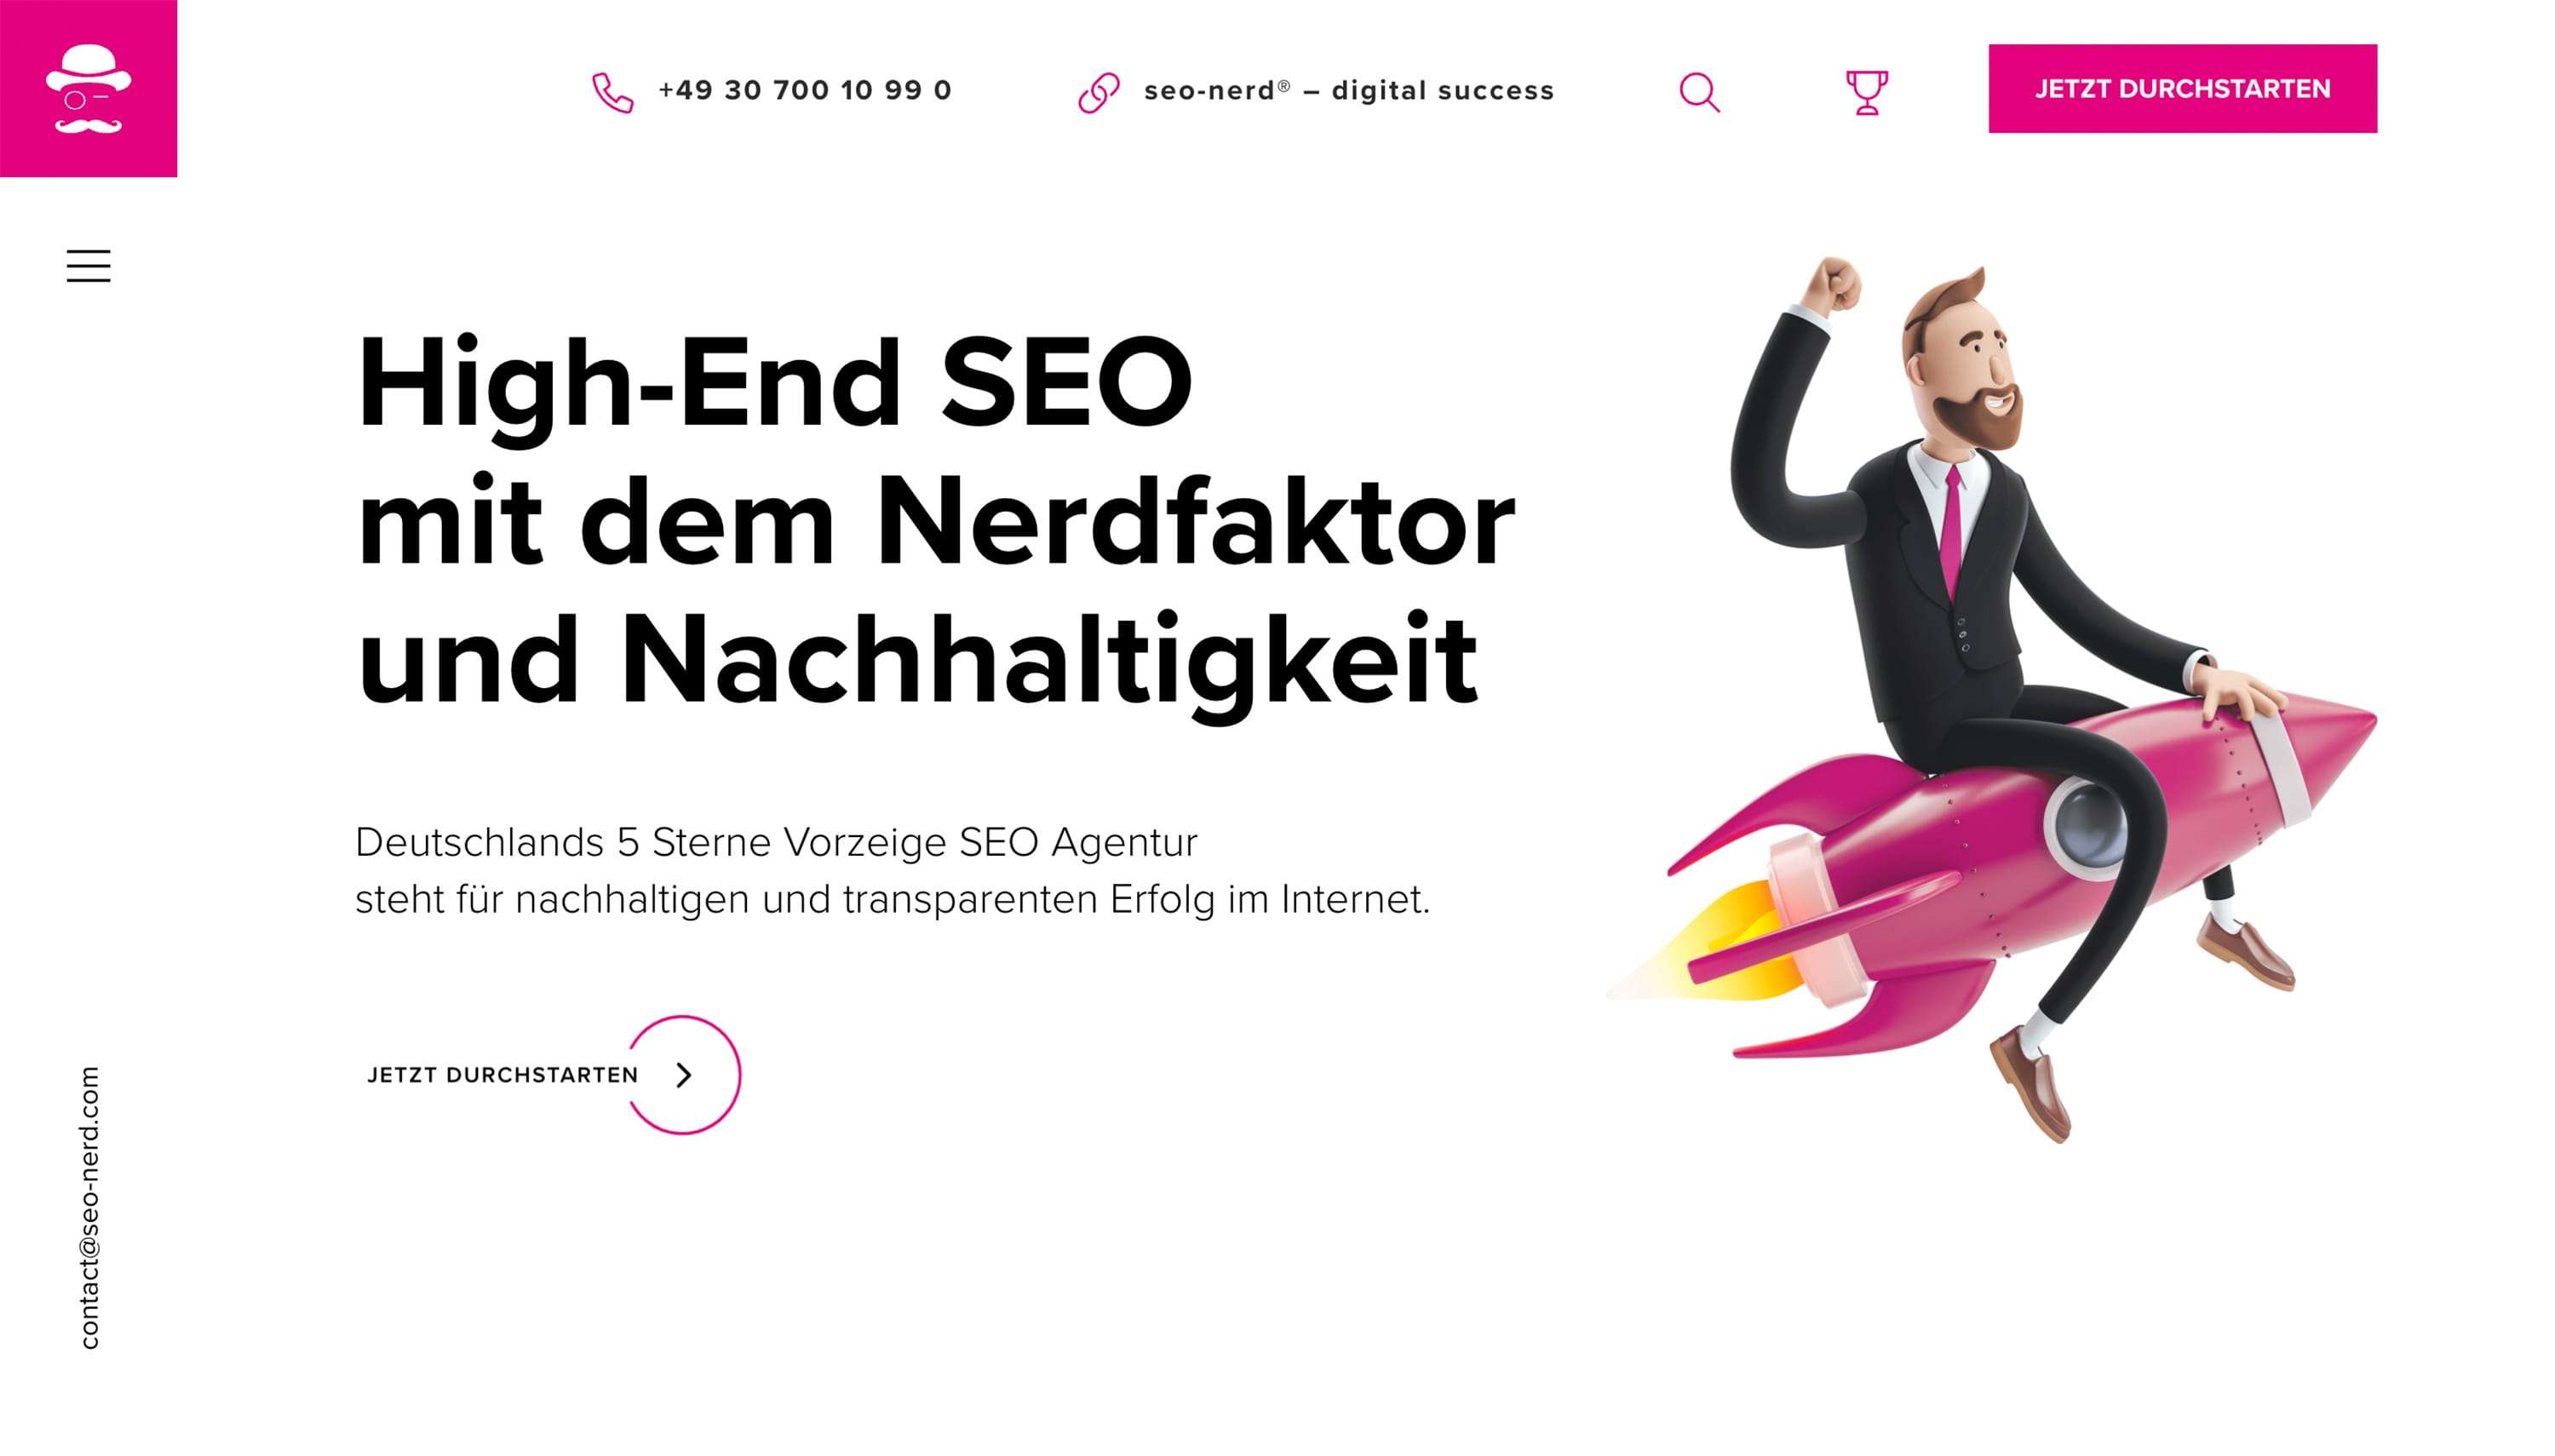 Germany's 5 star high-end SEO agency stands for sustainable and transparent success on the Internet.